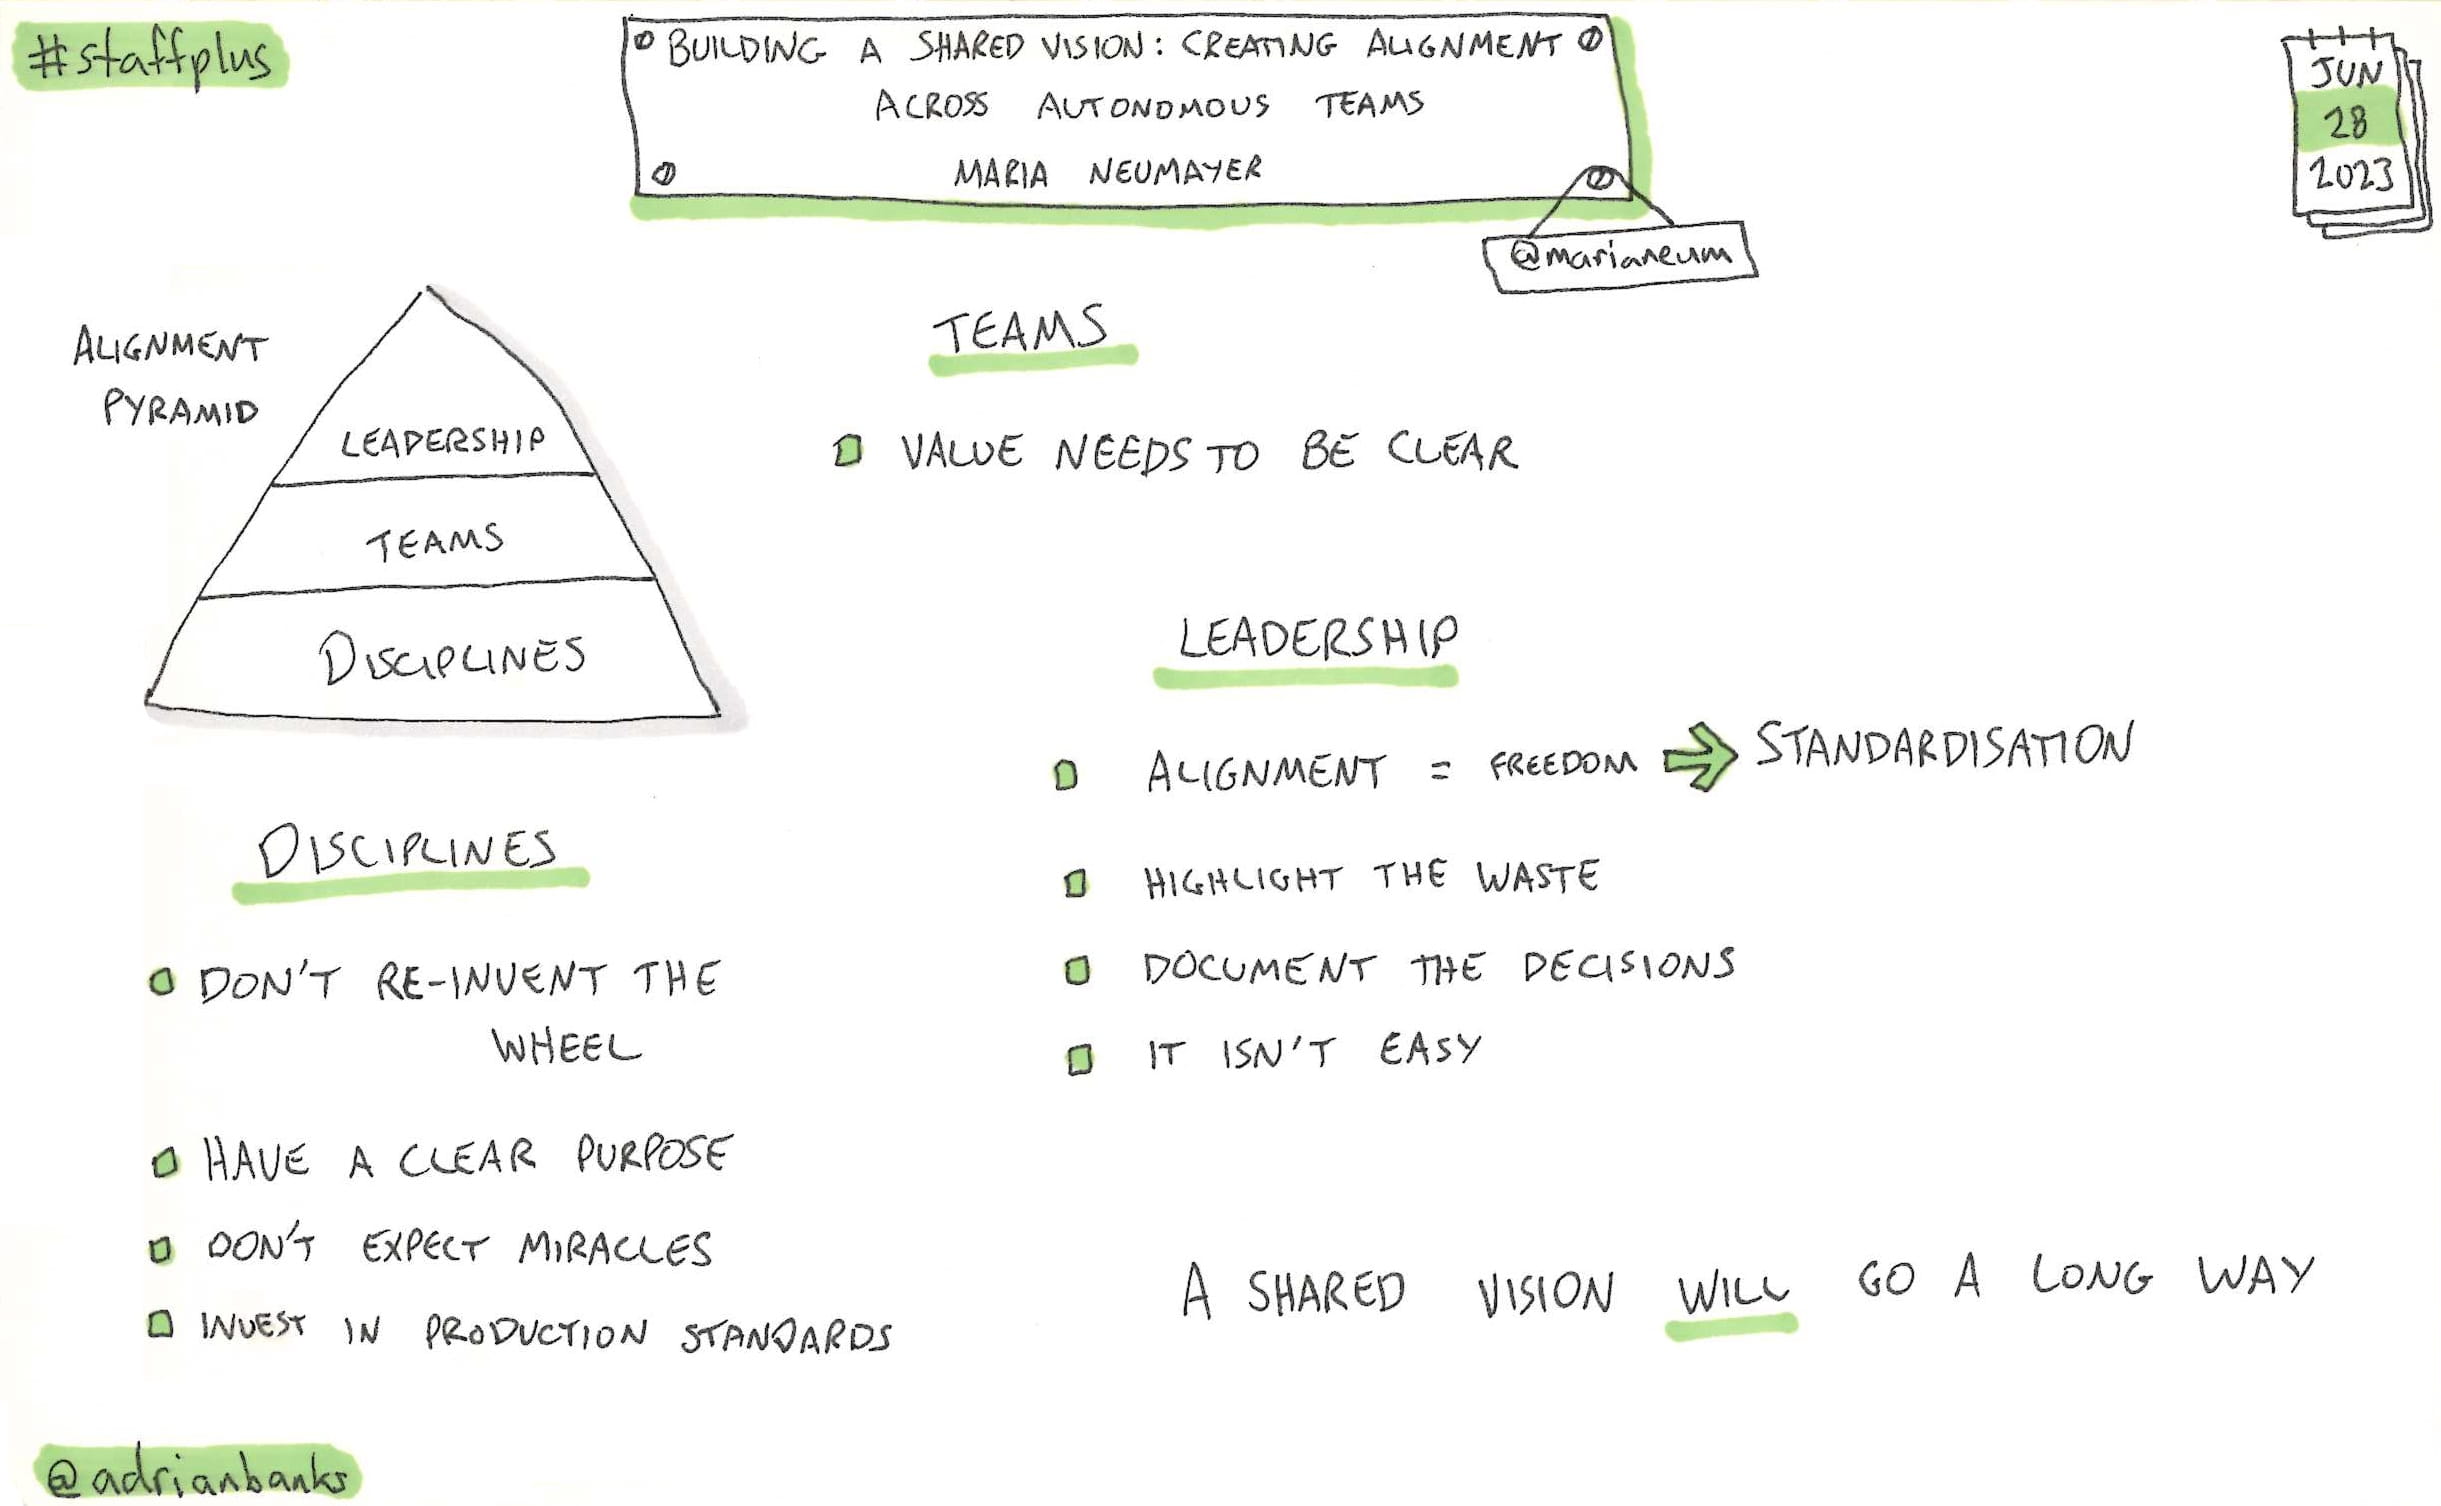 Building A Shared Vision: Creating Alignment Across Autonomous Teams by Maria Neumayer